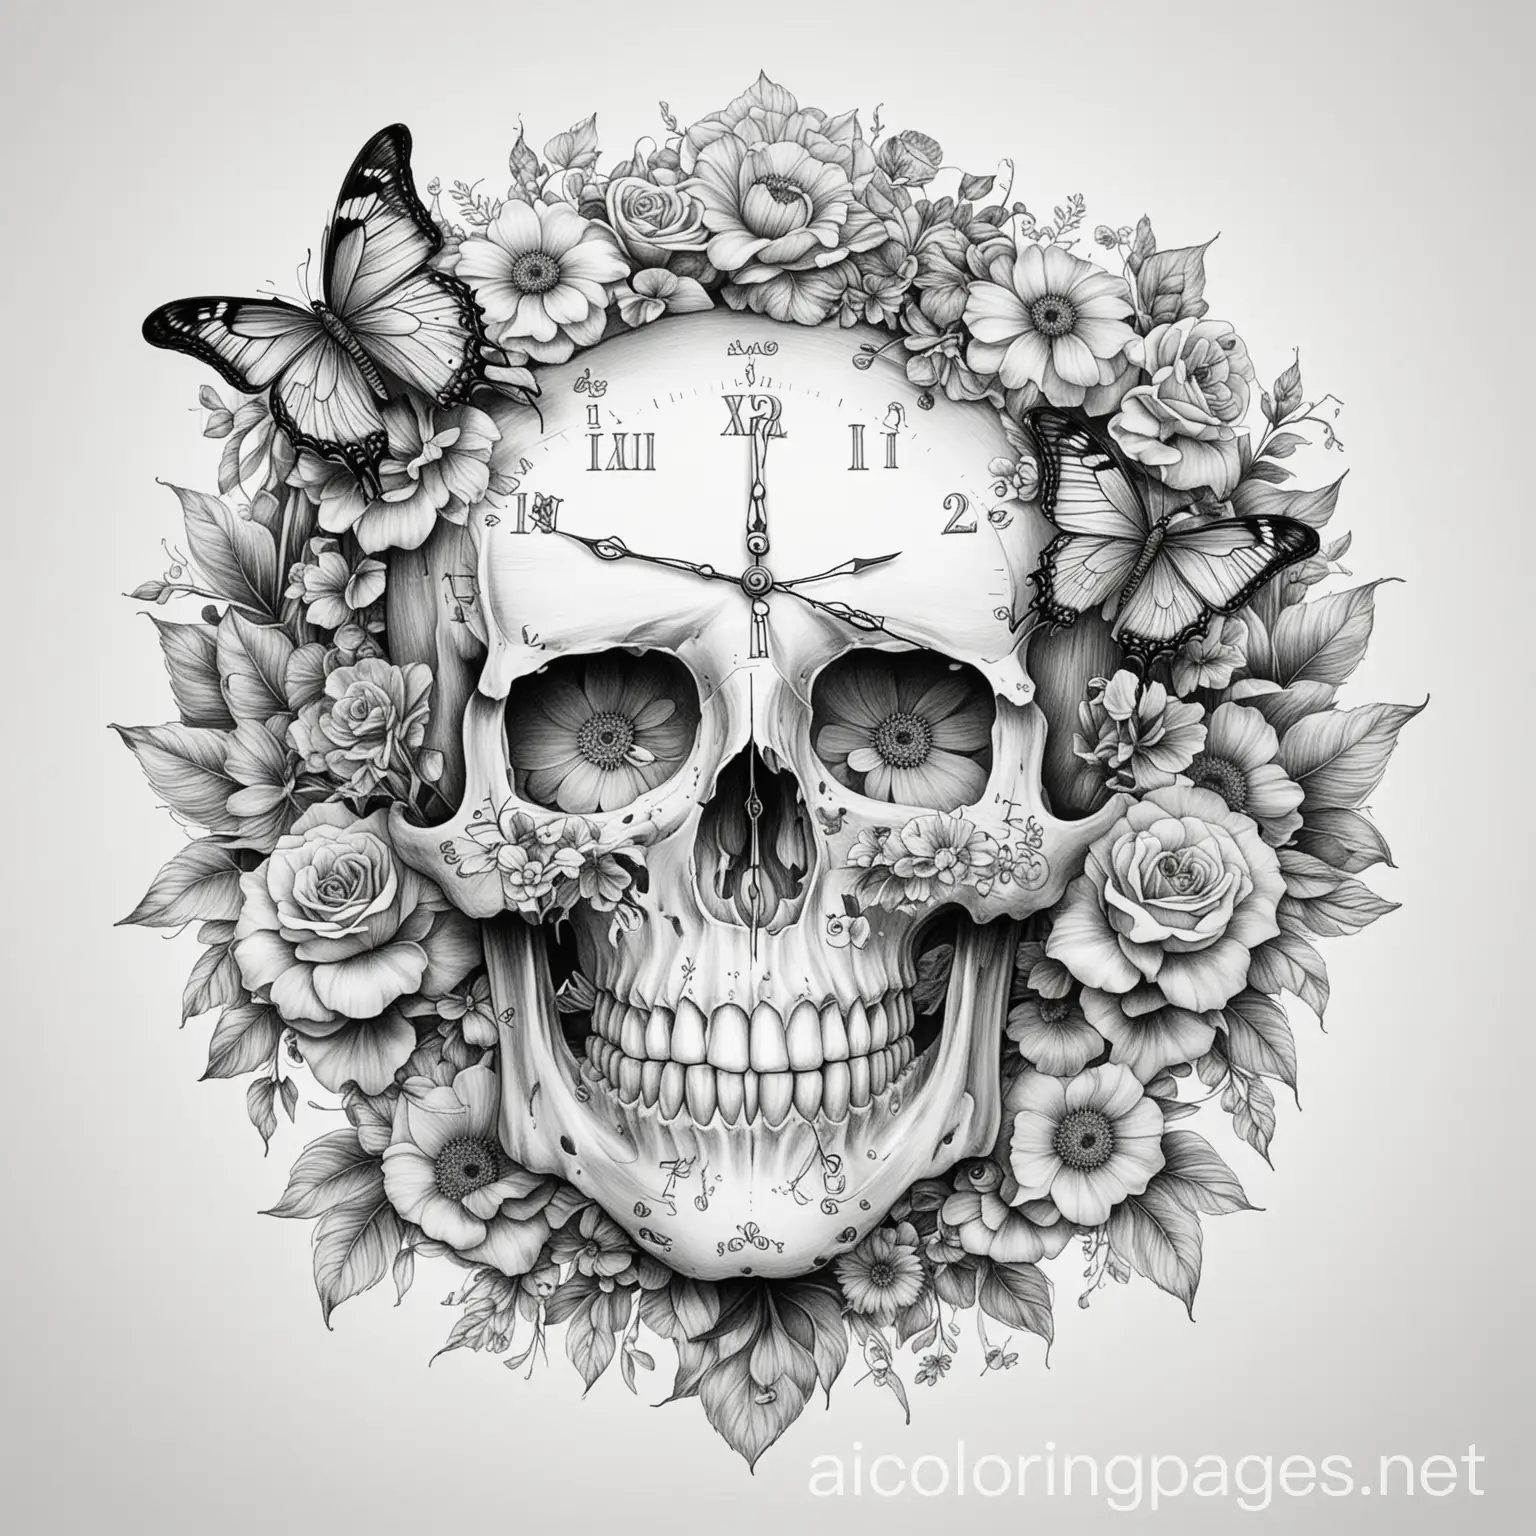 Skull with clock , butterflys and beautiful flowers, Coloring Page, black and white, line art, white background, Simplicity, Ample White Space. The background of the coloring page is plain white to make it easy for young children to color within the lines. The outlines of all the subjects are easy to distinguish, making it simple for kids to color without too much difficulty